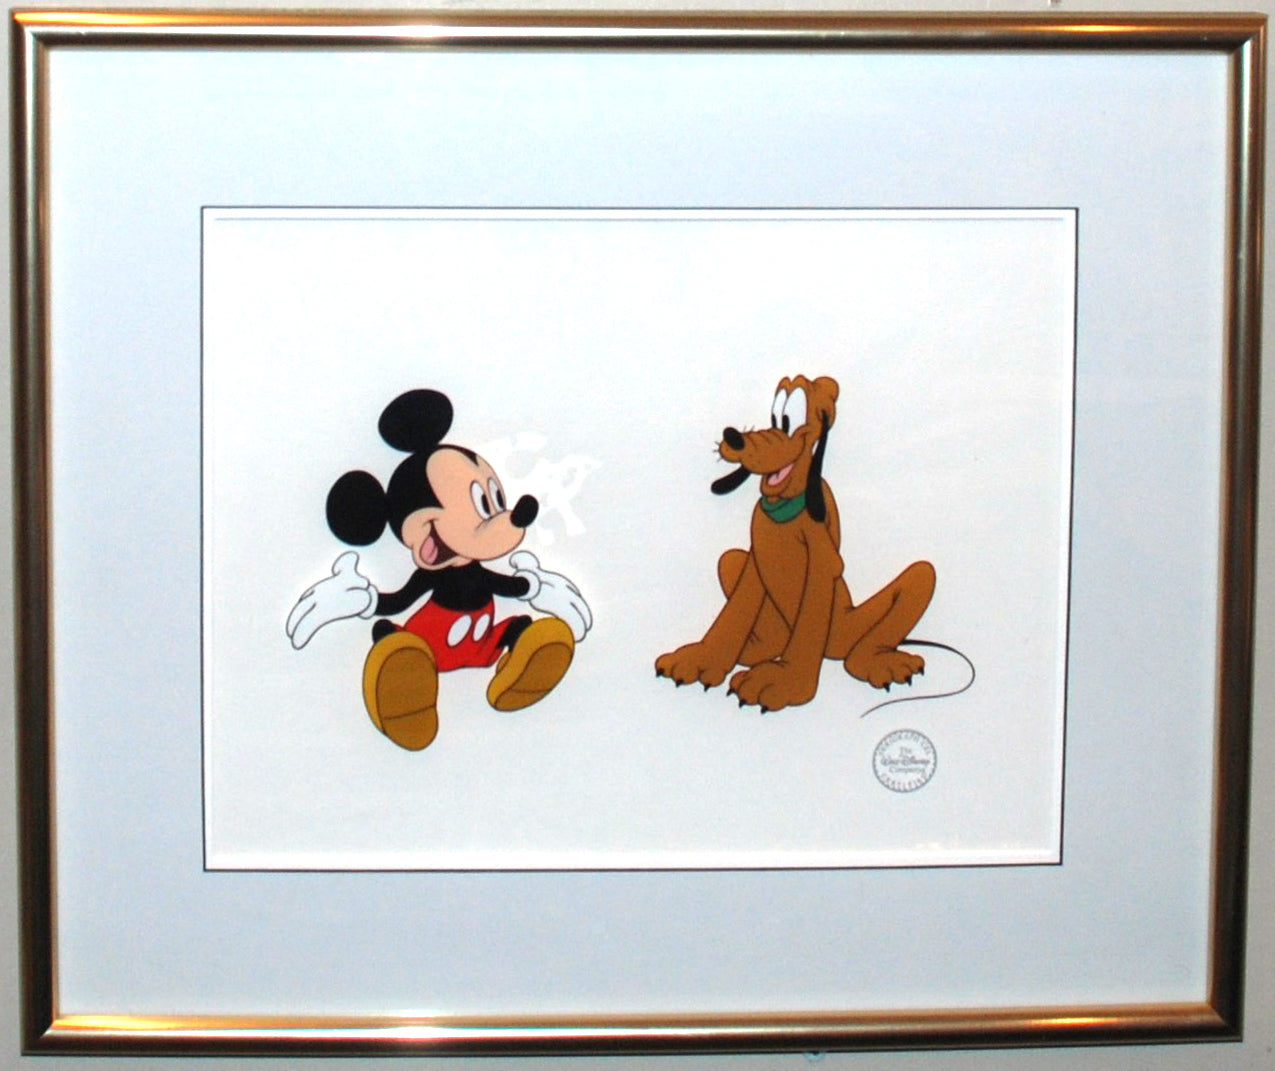 Original Walt Disney Limited Edition Sericel "Mr. Mouse Takes a Trip" Featuring Mickey Mouse and Pluto